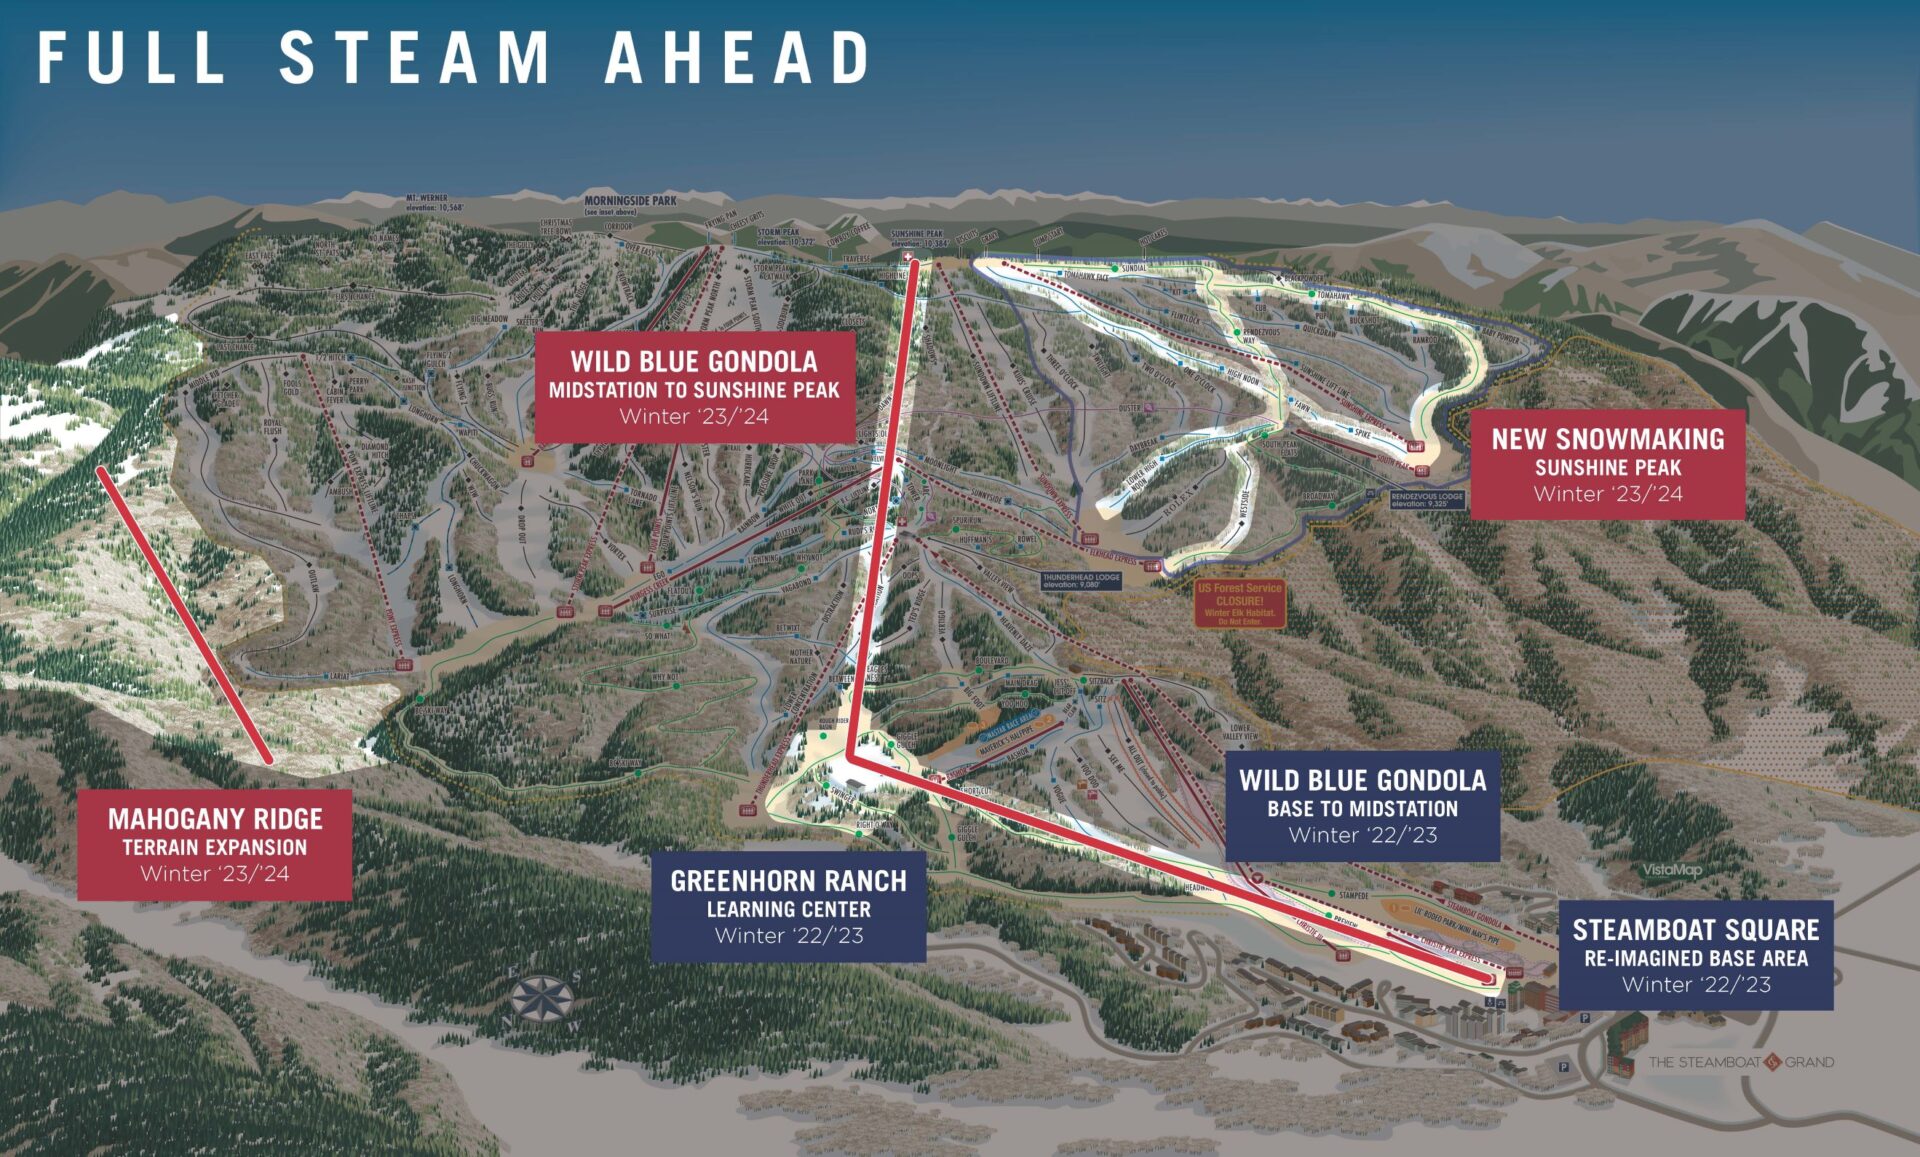 While Steamboat has been shaped by its rich past, today, The Full Steam Ahead project looks forward to shaping the future. With an investment of $200 million on and around the mountain, to enhance the Steamboat experience. Find out why Steamboat should be the next resort on your bucket list.